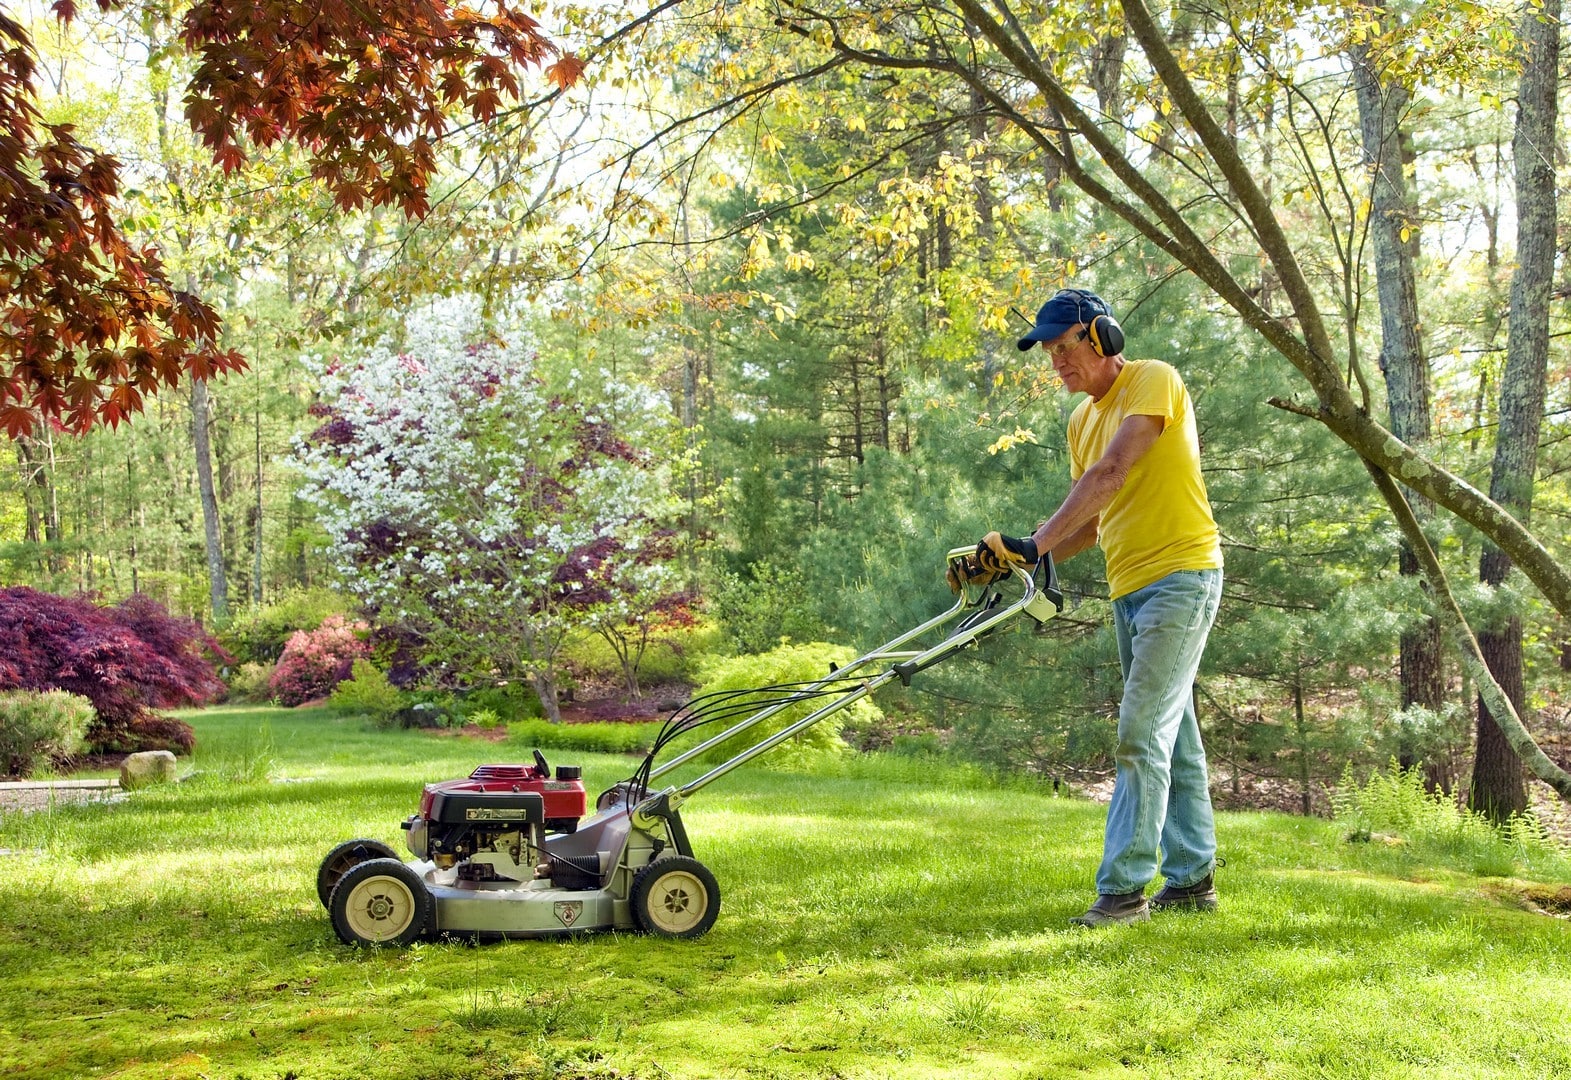 Lawnmower repairs and servicing